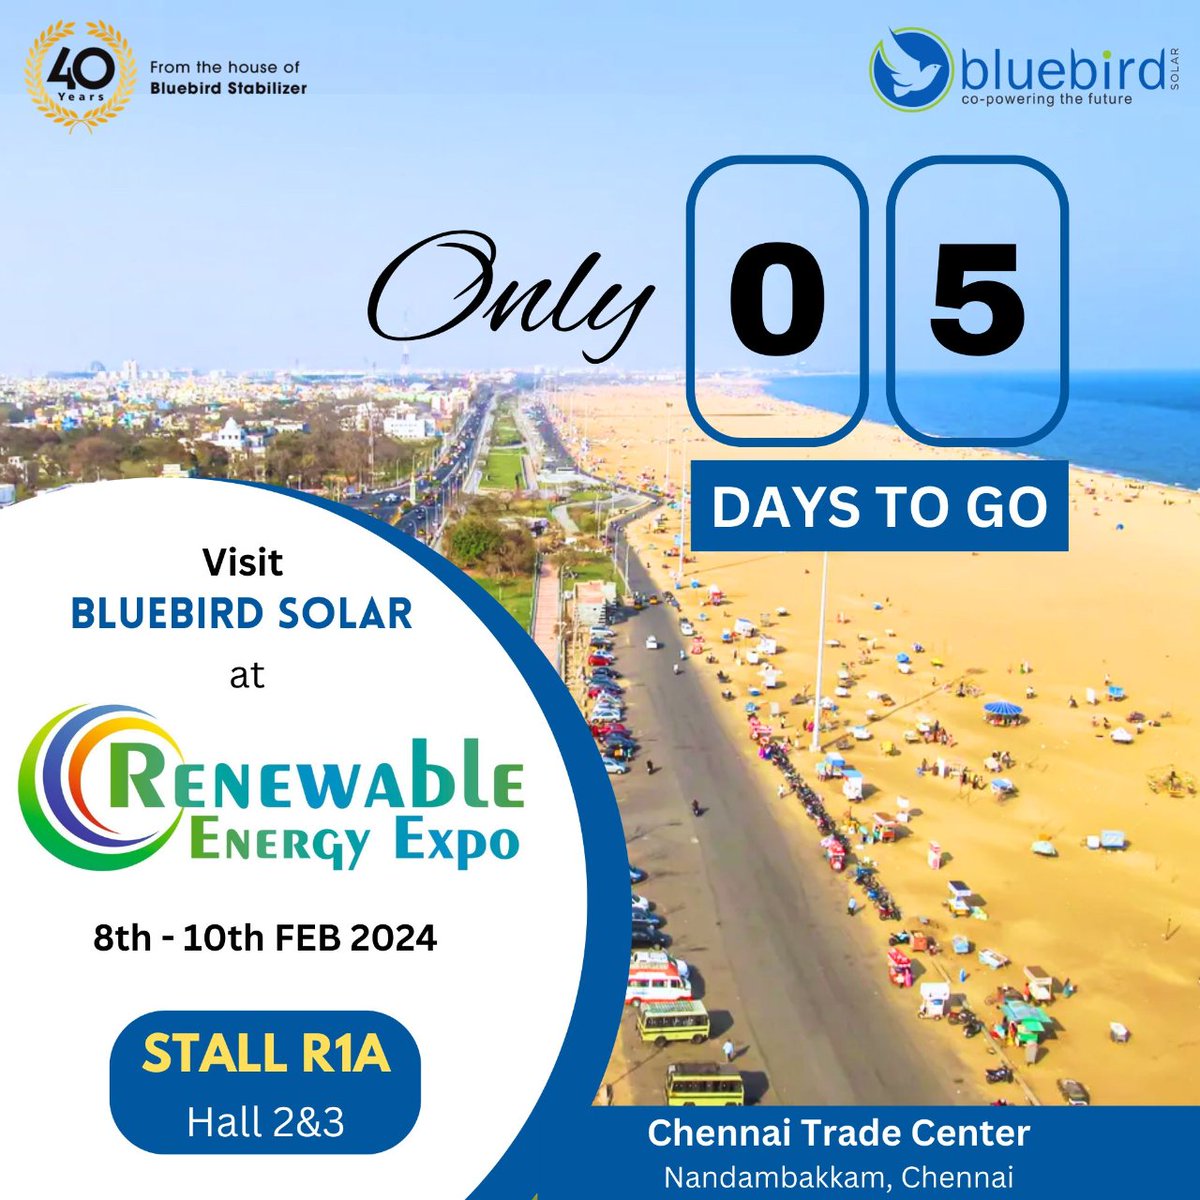 Only 5 Days to Go ! Join us in #Chennai at the #Renewable #Energy #Expo from February 8th to 10th at #ChennaiTradeCenter, #Nandambakkam and Discover the latest in #solarinnovation with our wide array of #HalfCut #SolarModules   

Schedule Your Visit Here
docs.google.com/forms/d/e/1FAI…